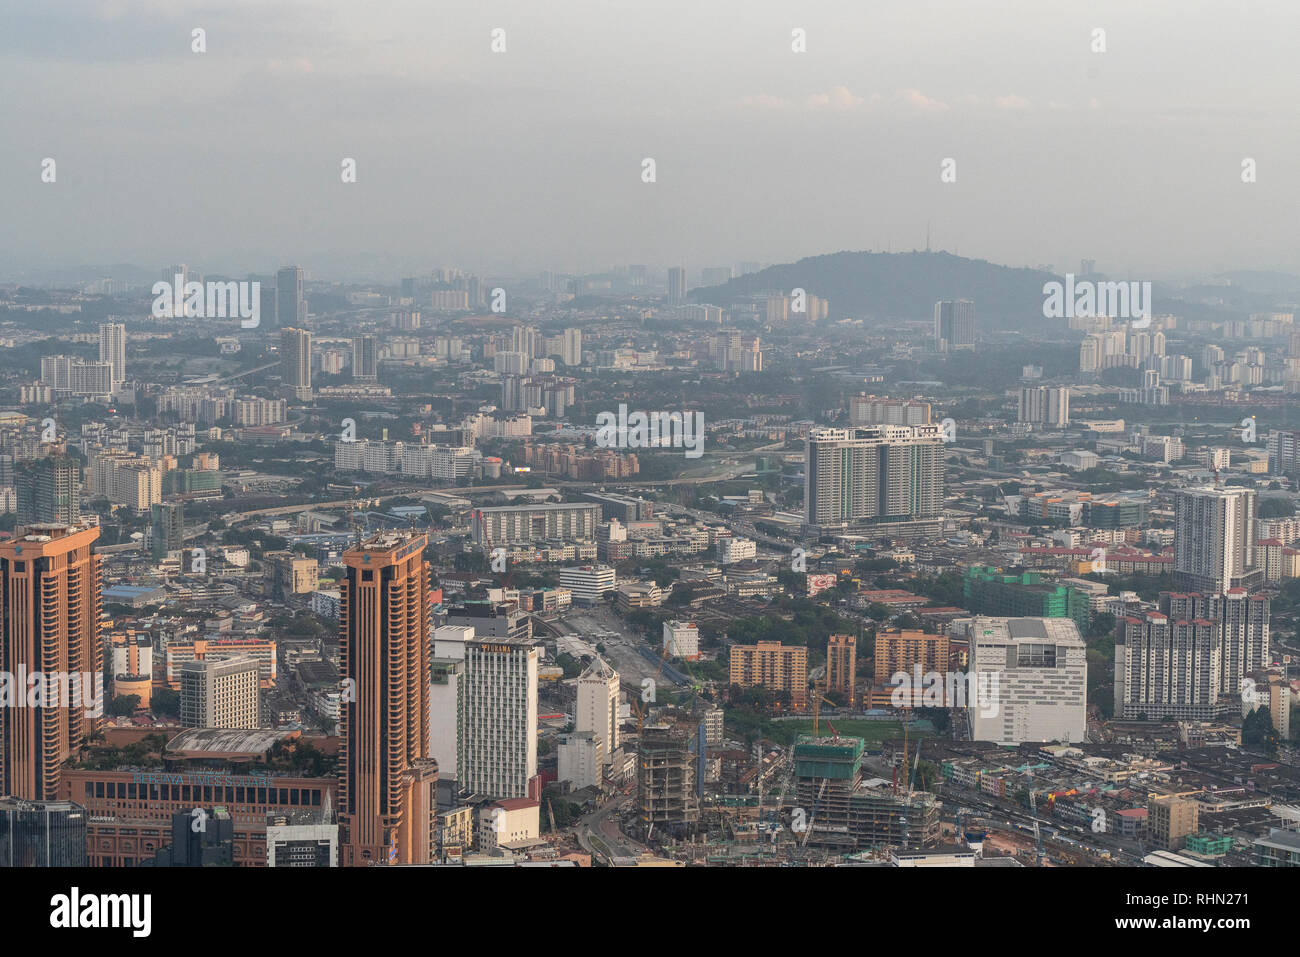 A view of the city from the Menara tower in Kuala Lumpur, Malaysia Stock Photo